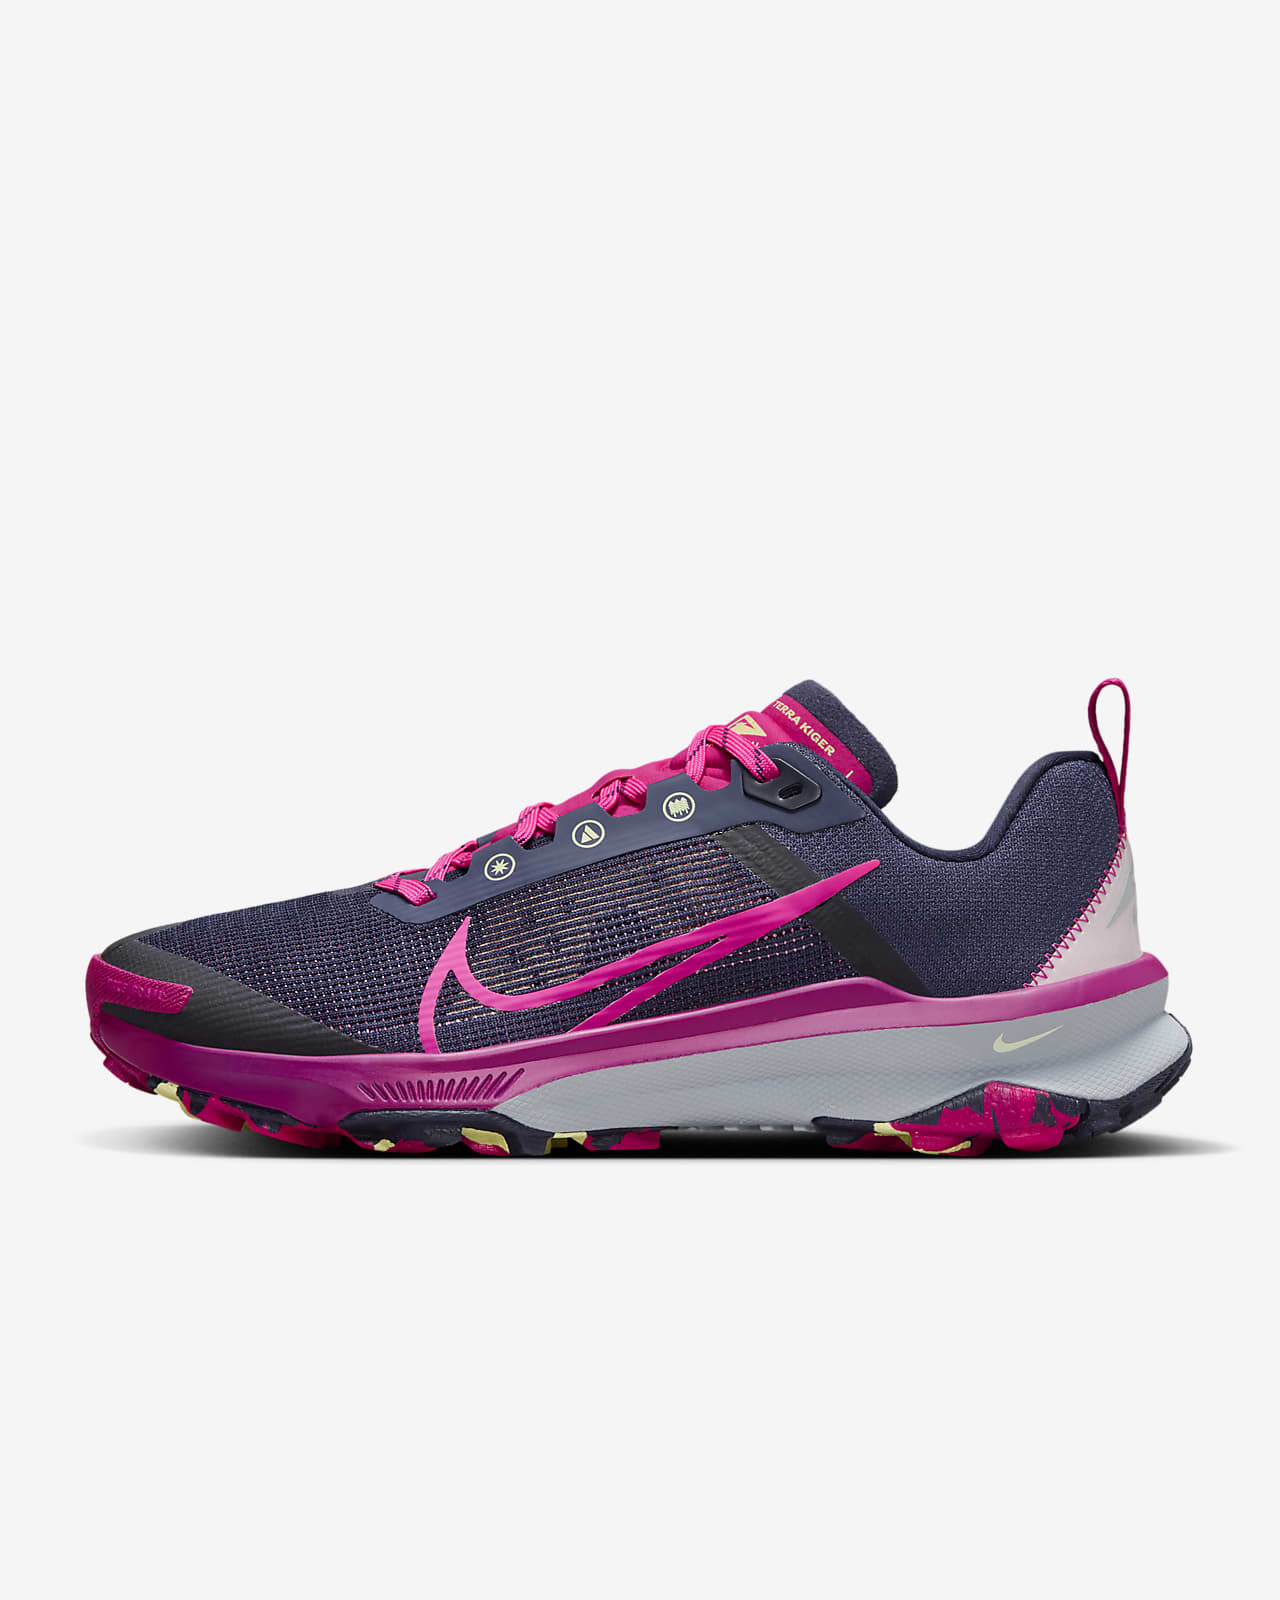 Nike Kiger 9 Women's Trail Running Shoes